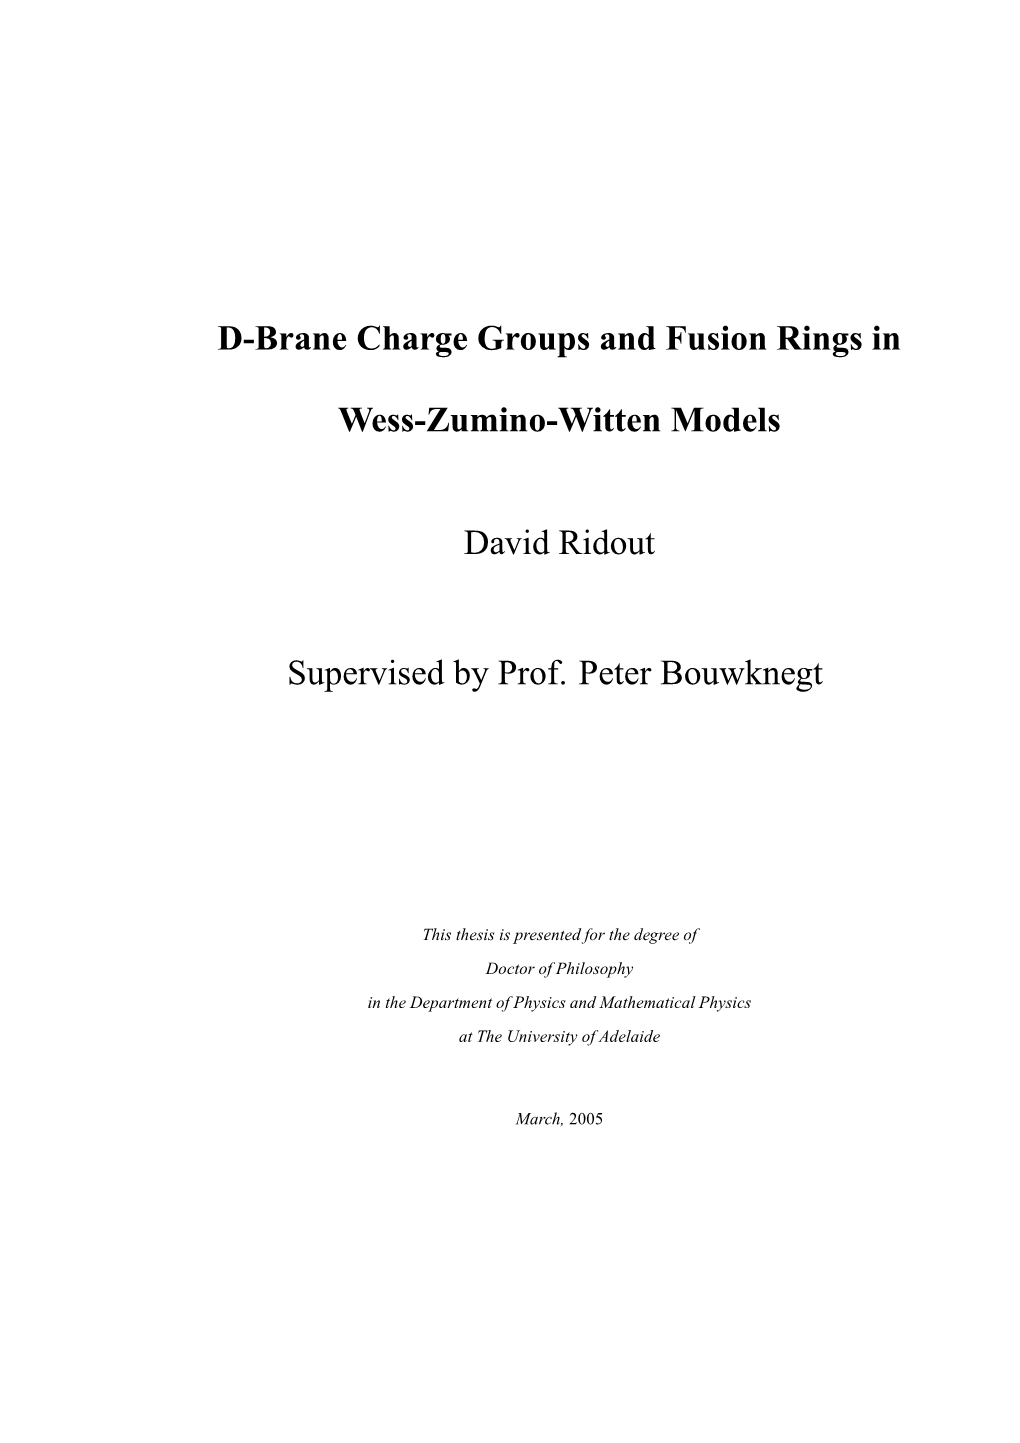 D-Brane Charge Groups and Fusion Rings in Wess-Zumino-Witten Models